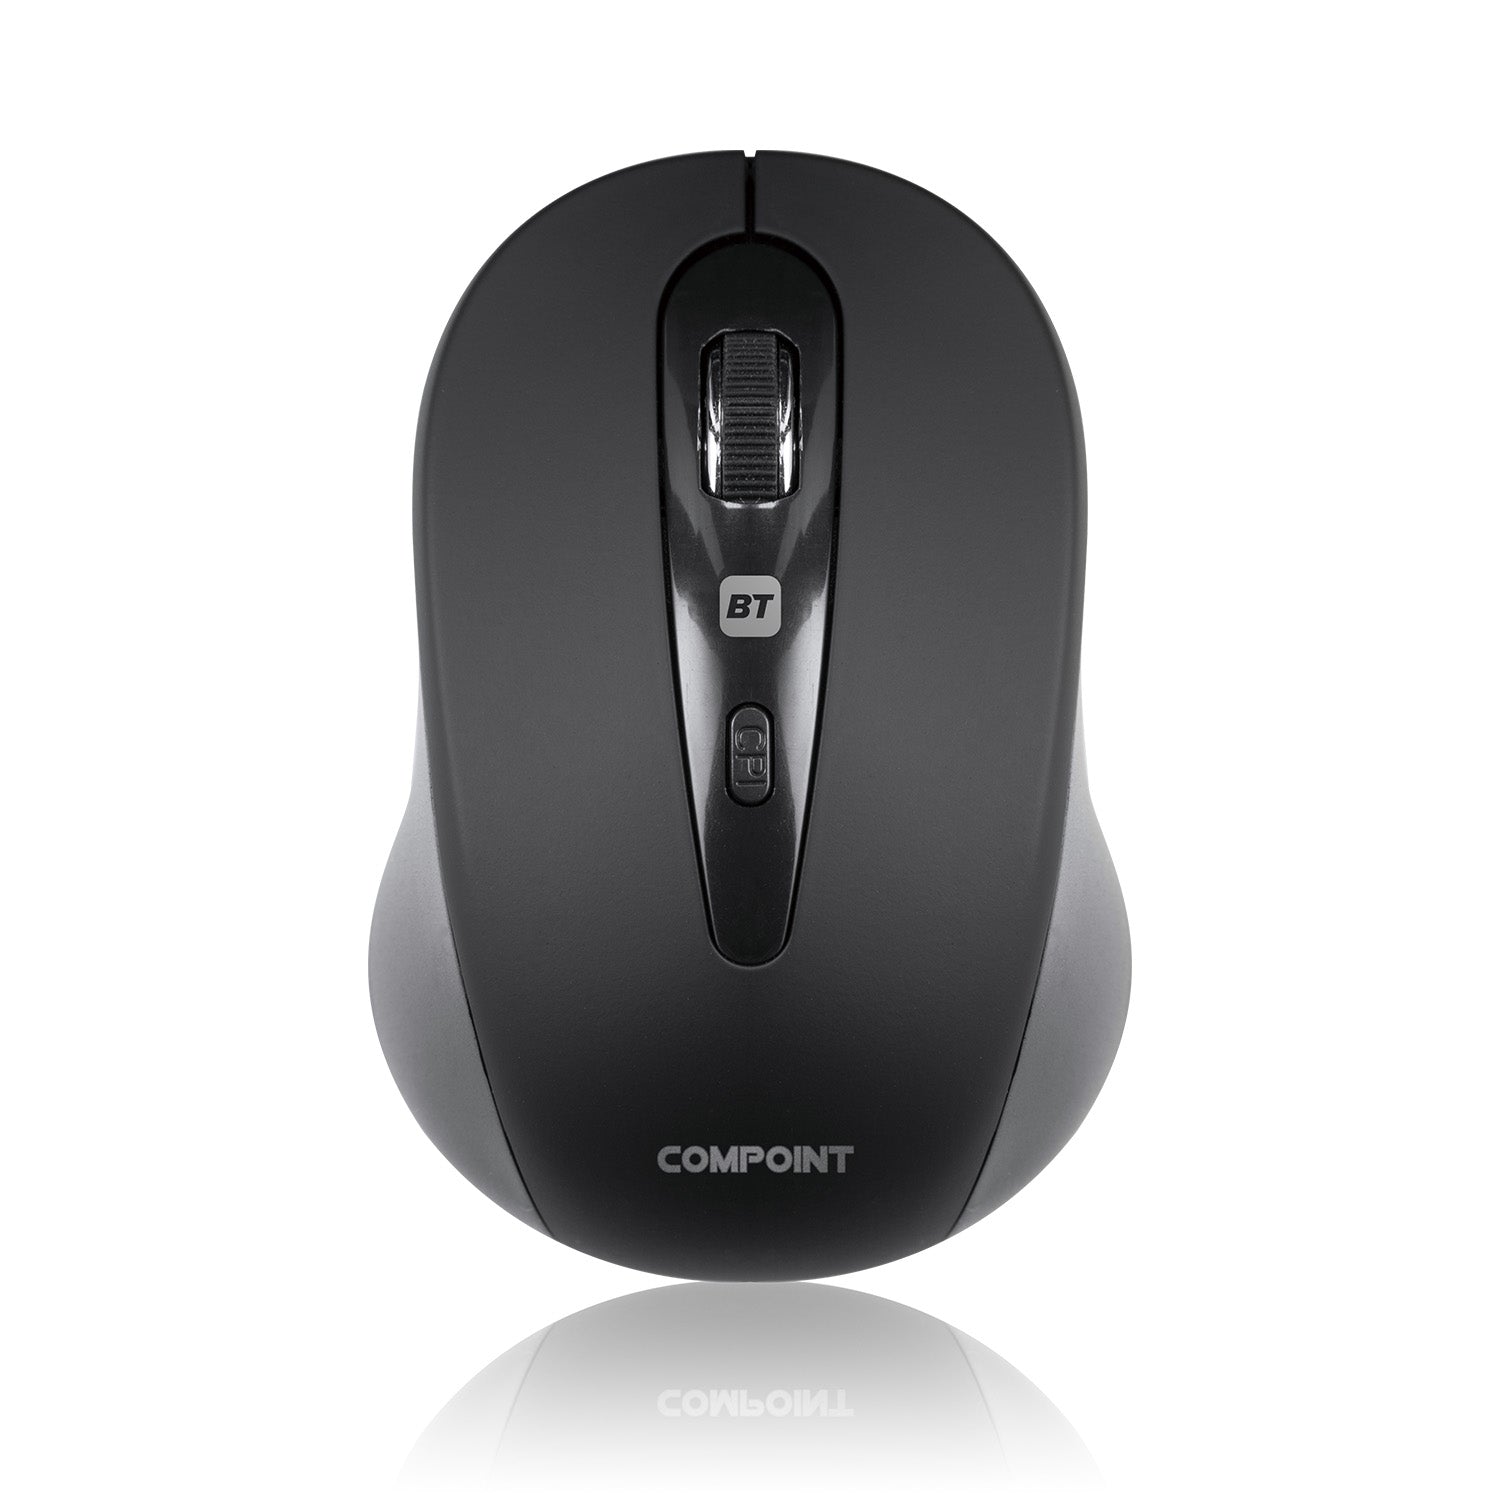 Multi-function wireless mouse